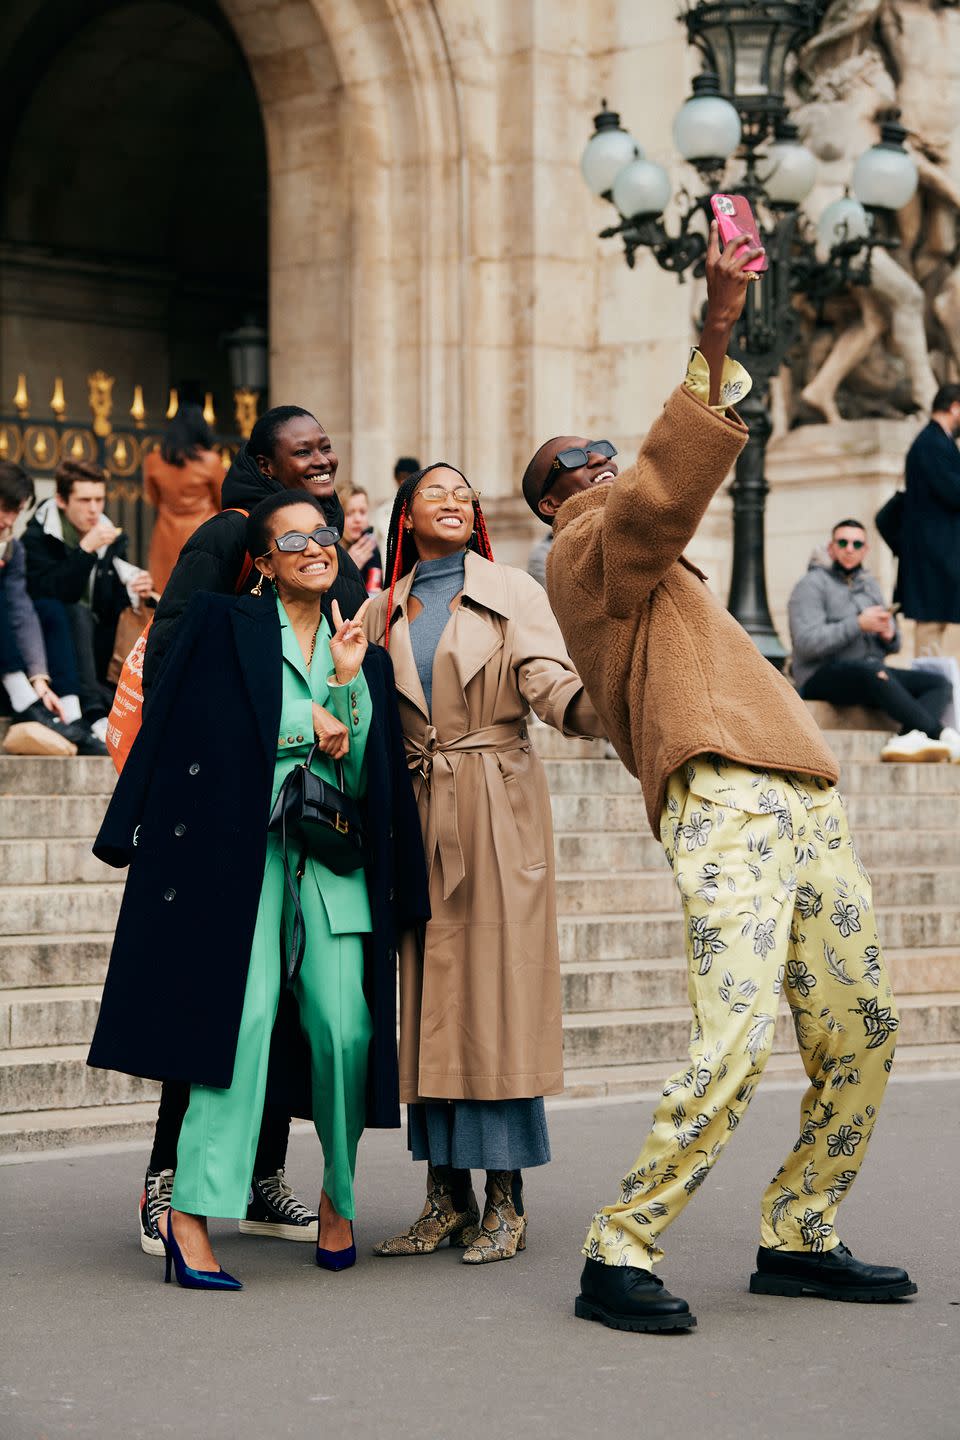 Need Style Inspiration? Look to the Streets of Paris Fashion Week